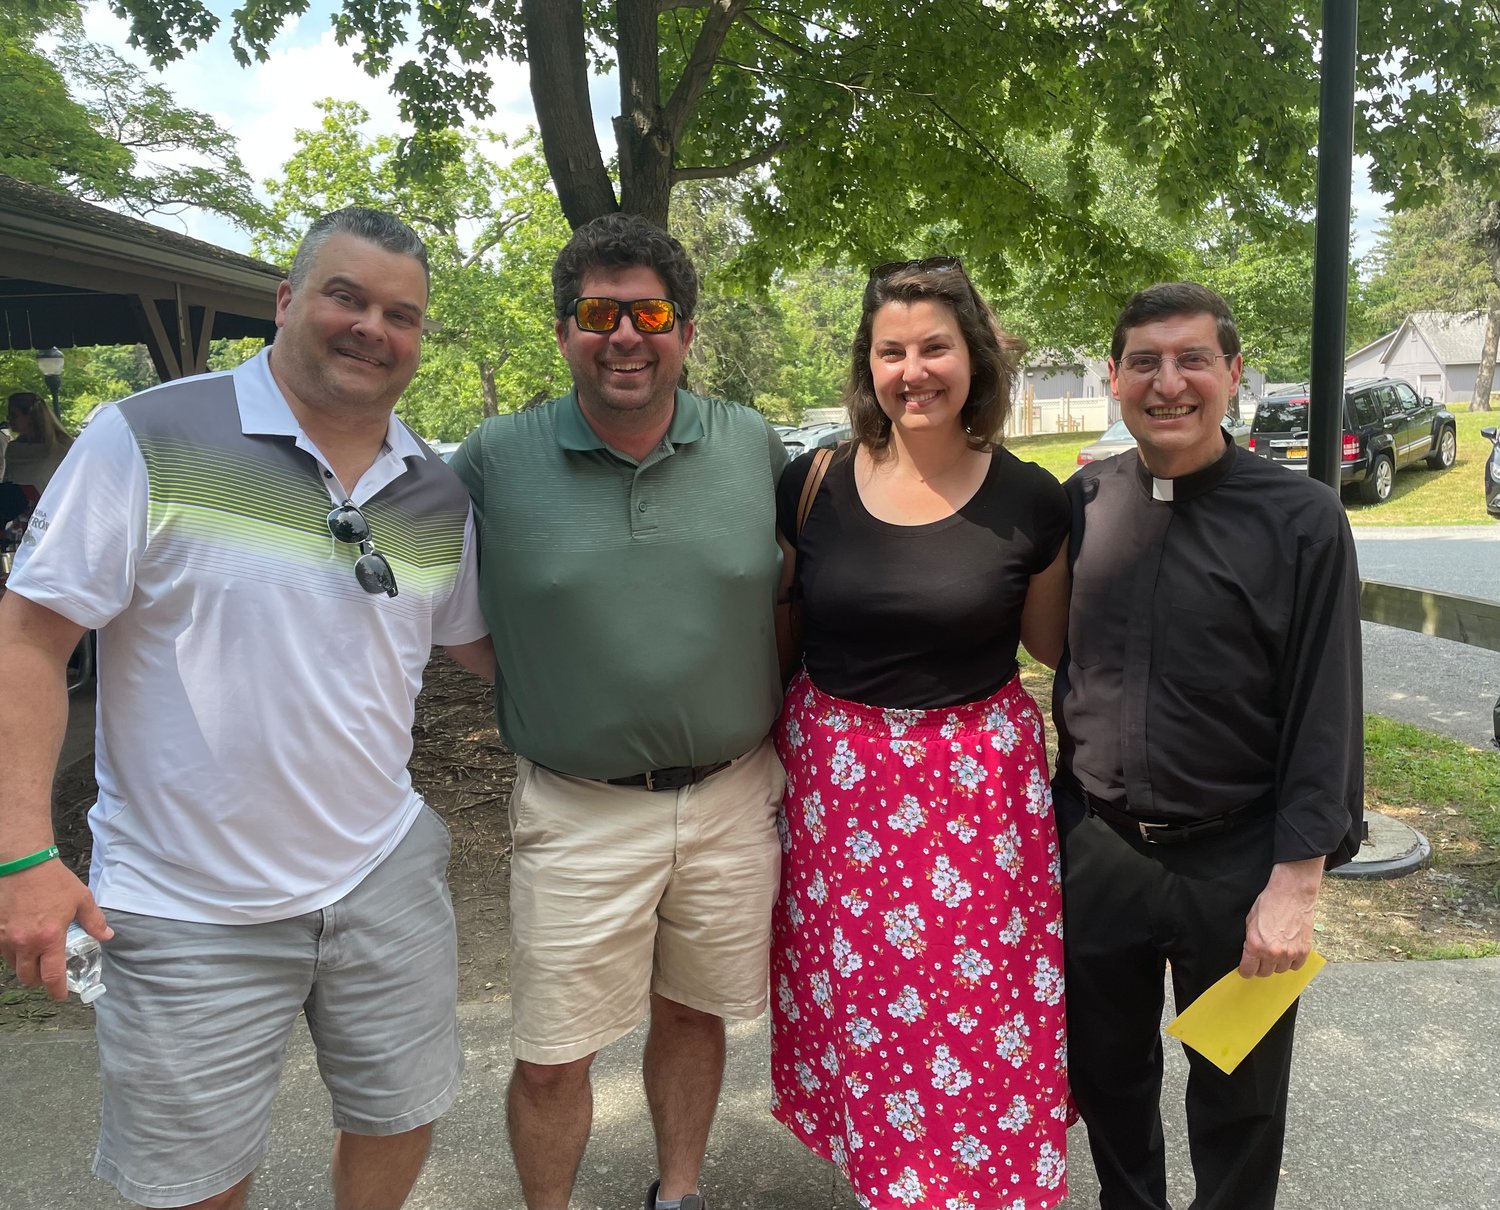 Msgr. Joseph Giandurco, pastor of St. Patrick’s, Yorktown Heights, spends time with parishioners at the parish’s annual picnic July 17 at Downing Park in Yorktown Heights.